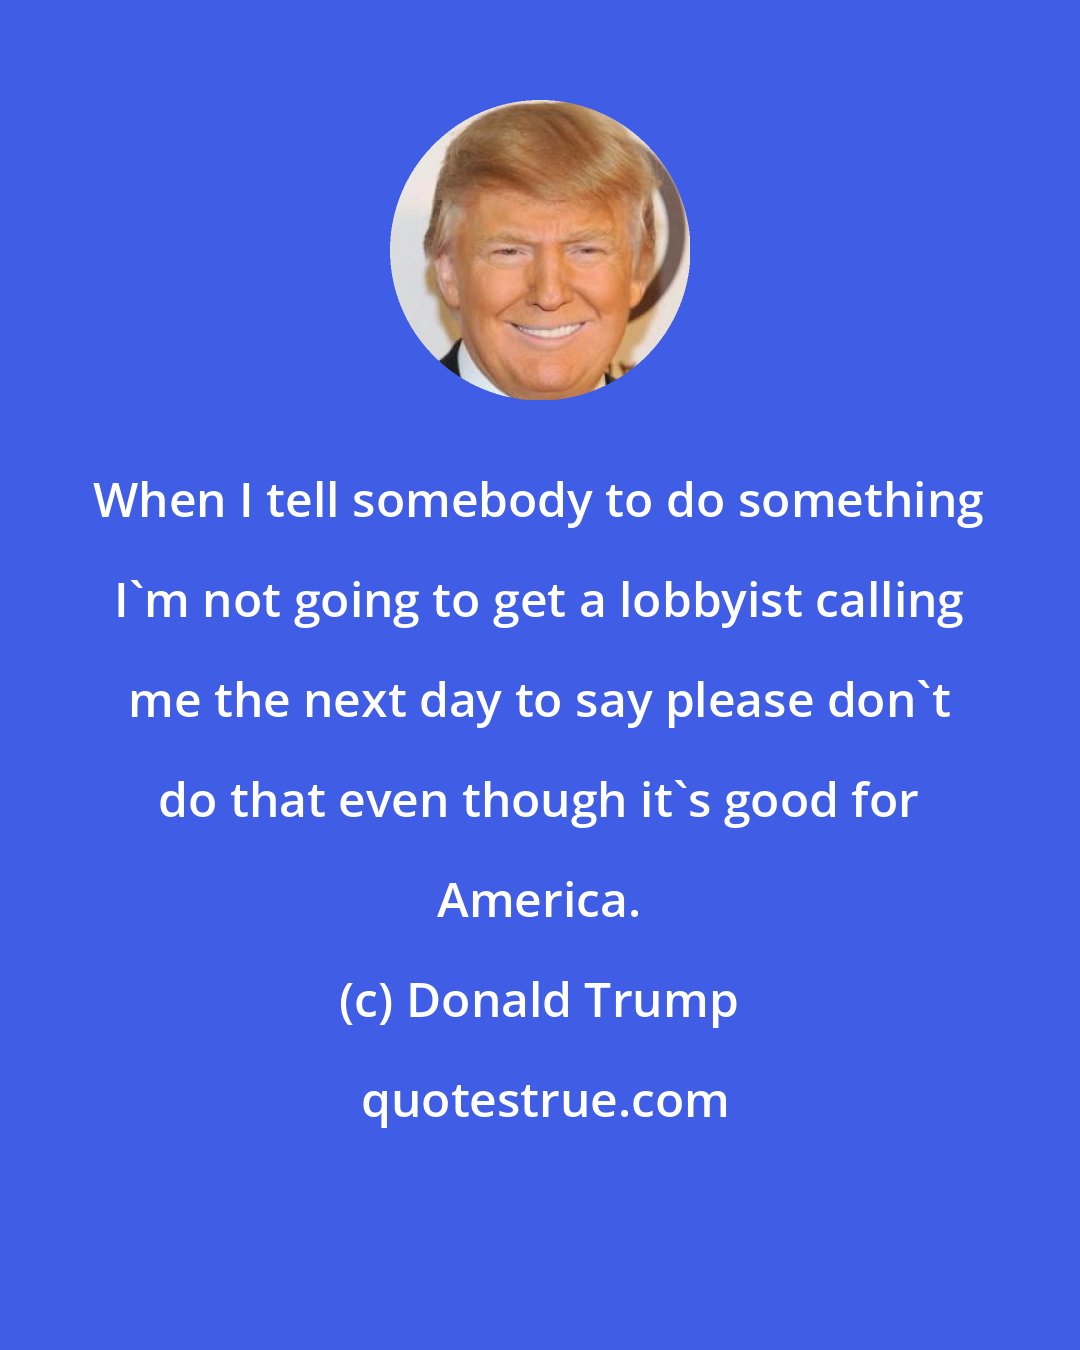 Donald Trump: When I tell somebody to do something I'm not going to get a lobbyist calling me the next day to say please don't do that even though it's good for America.